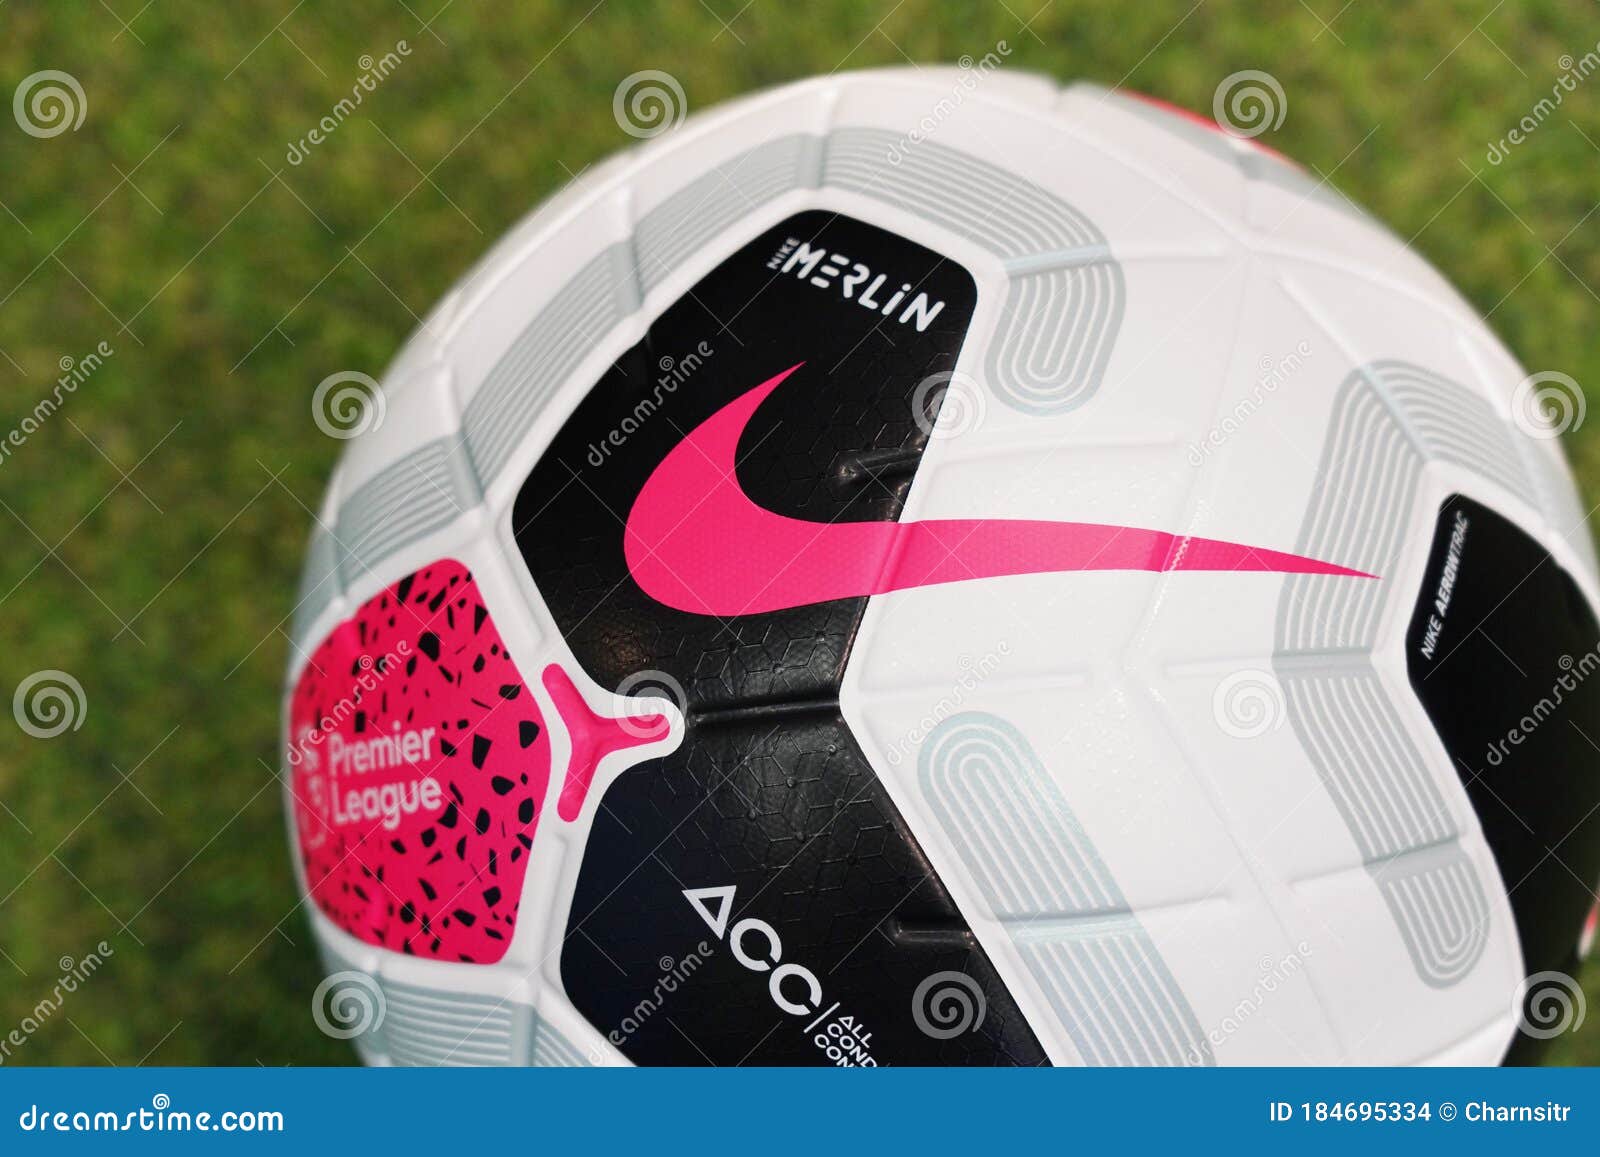 Close-Up on Nike Merlin the Ofiicial English Premier League Match on the Grass O Editorial Stock Image - Image of covid19, match: 184695334